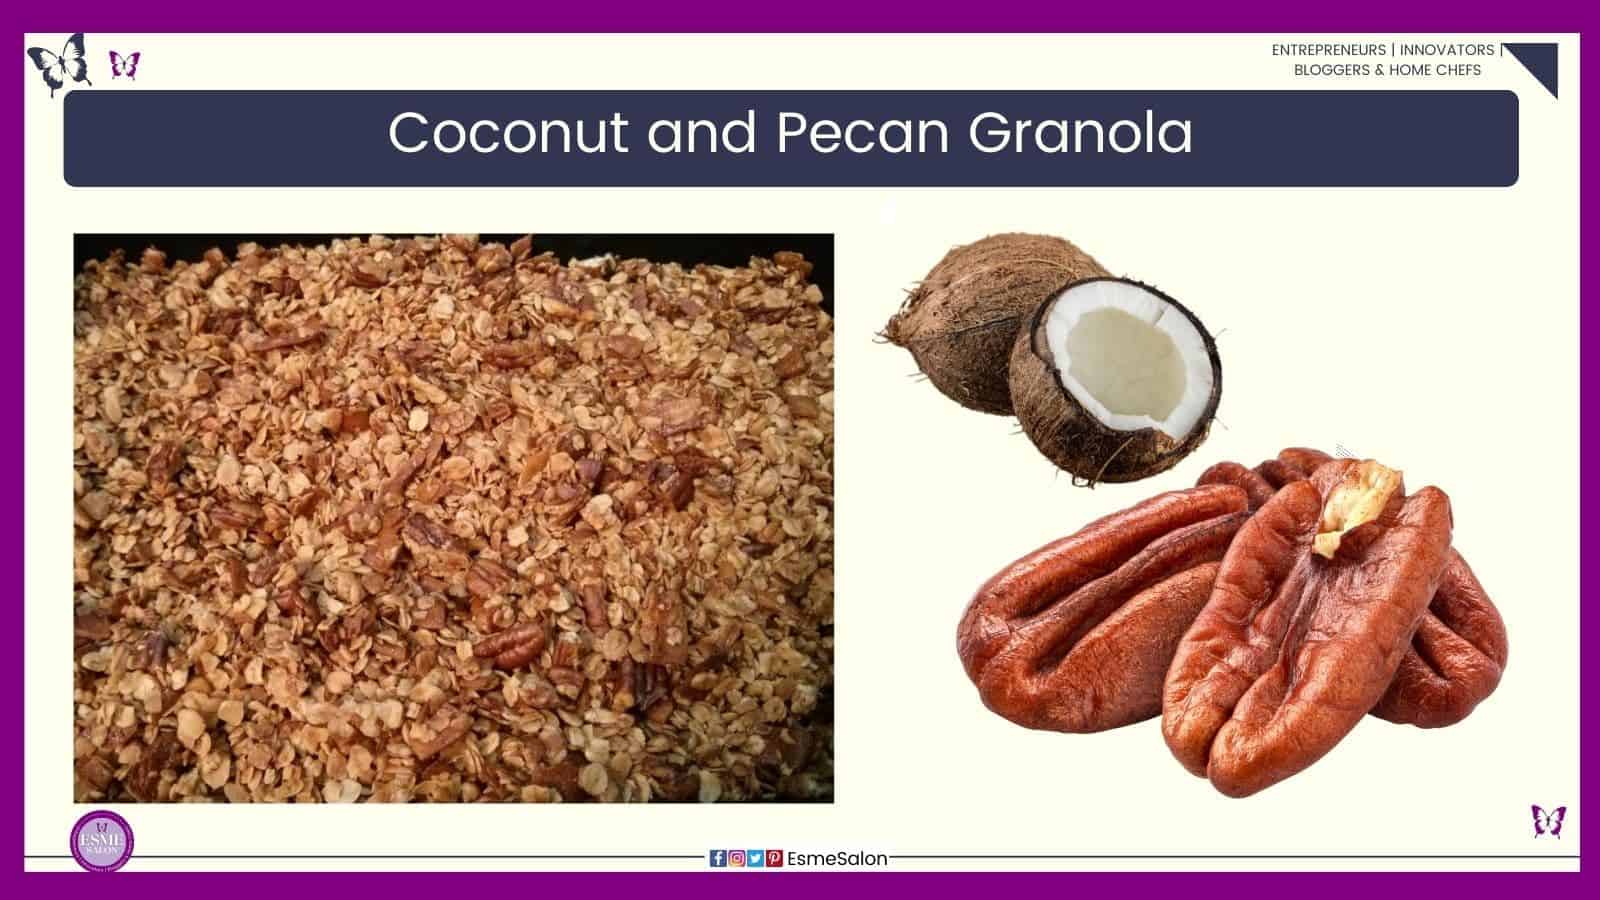 an image of a baking tray filled with Coconut and Pecan Granola and a cracked coconut and pecans on the side